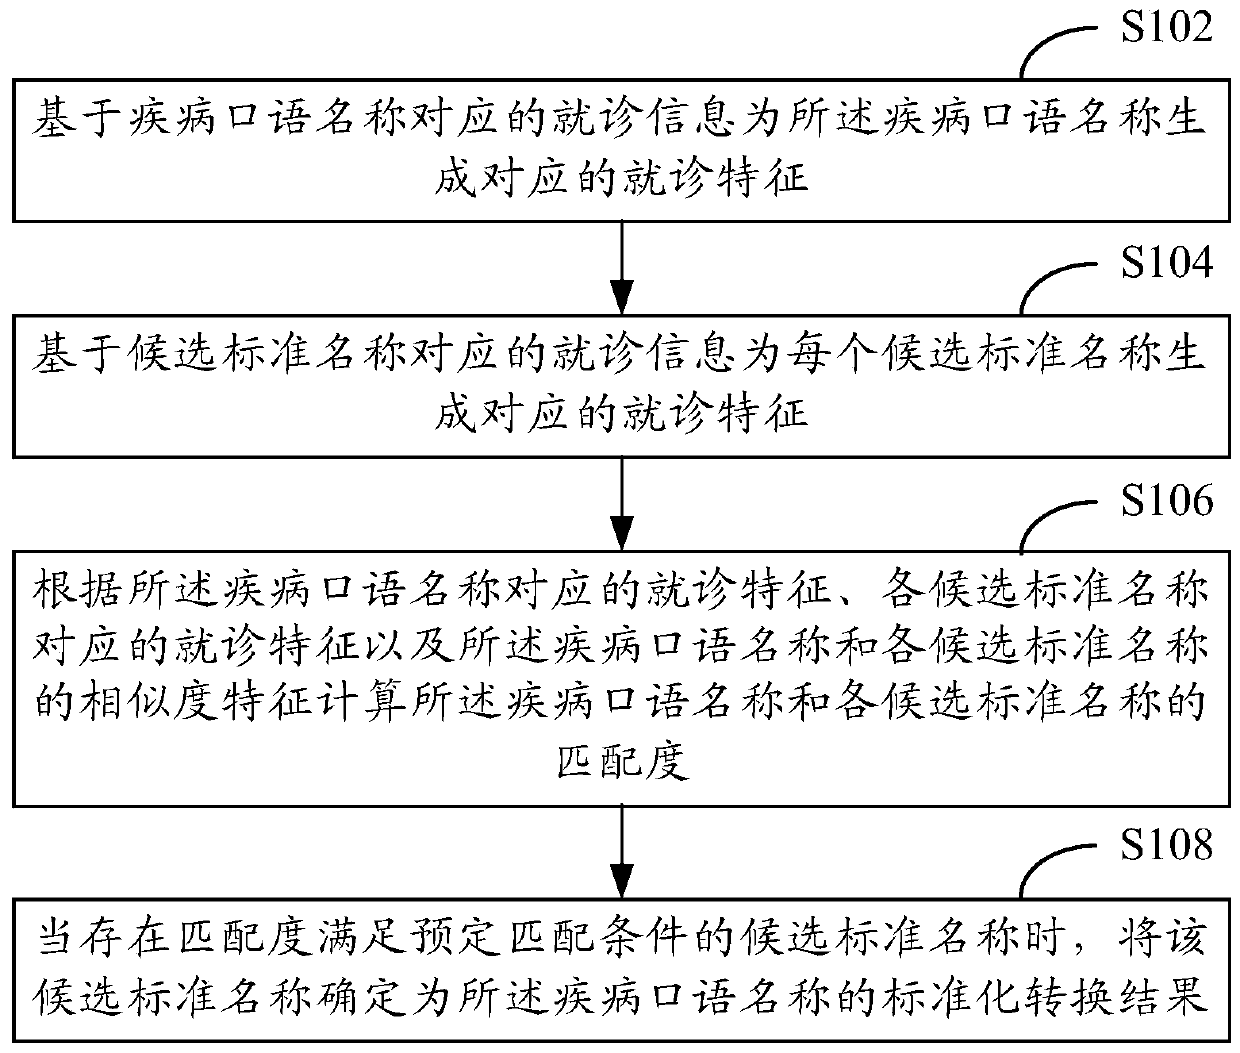 Disease name standardization conversion method and device